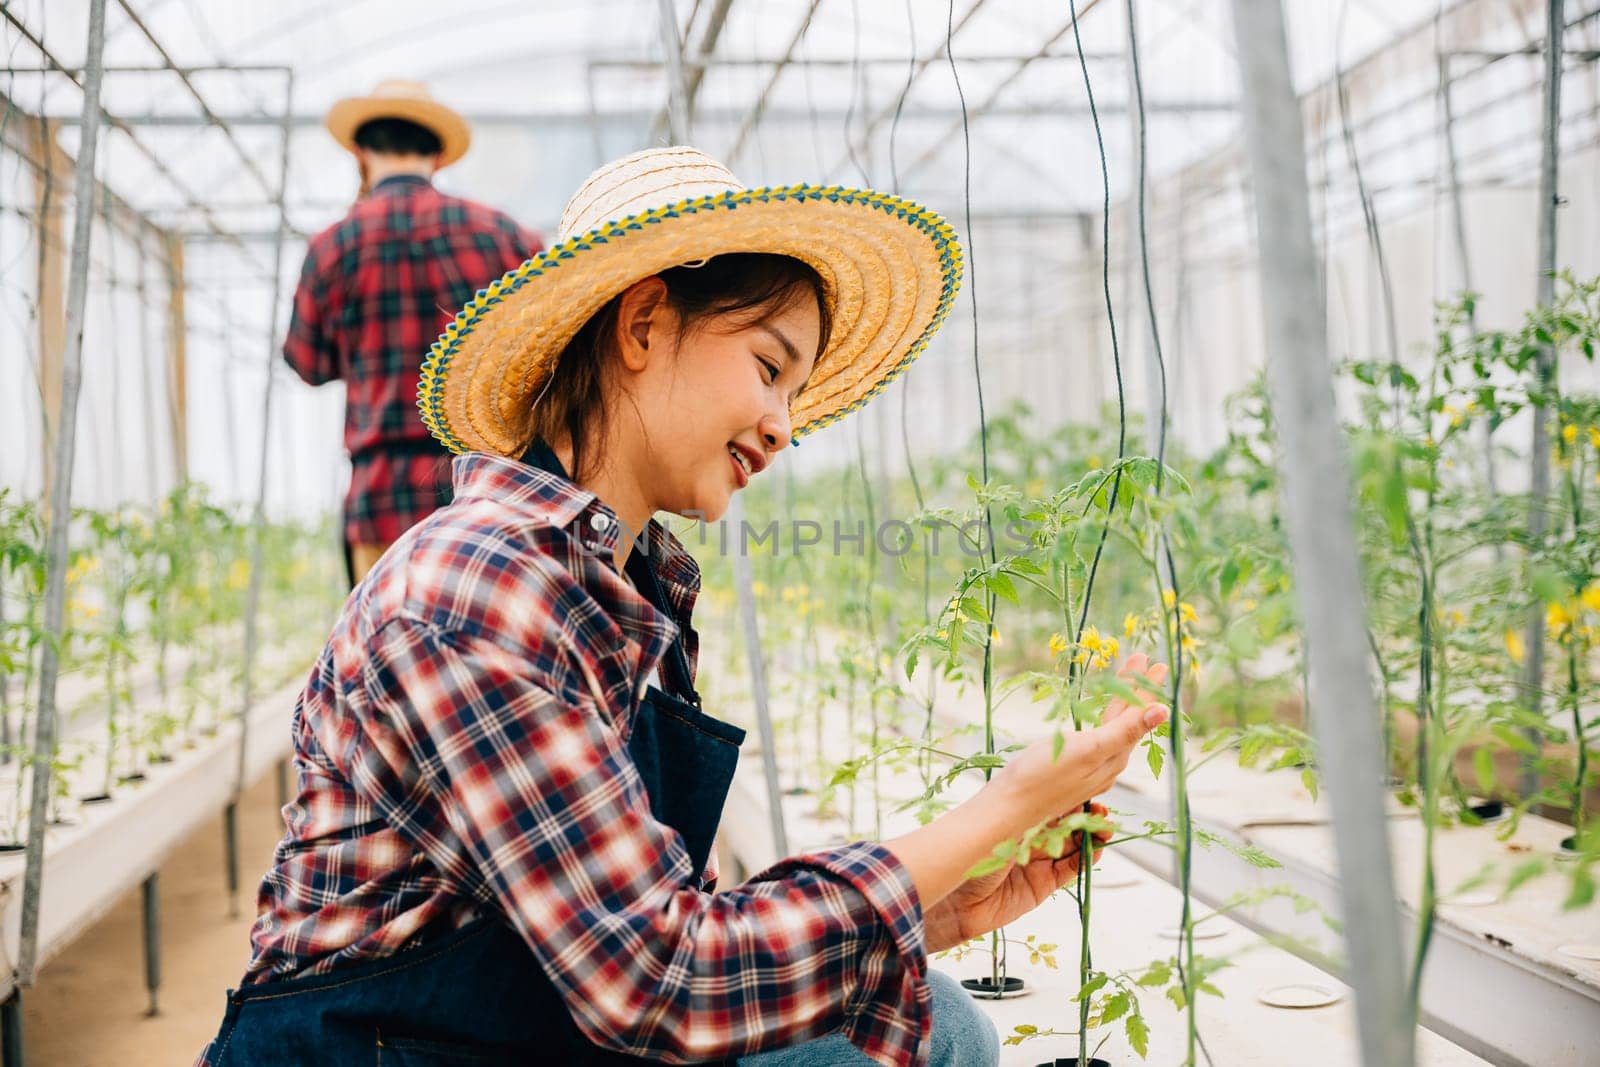 Woman in the greenhouse an entrepreneur and owner checks tomato plants for quality using modern technology. Ensuring optimal growth and care she showcases happiness in her thriving vegetable farm.